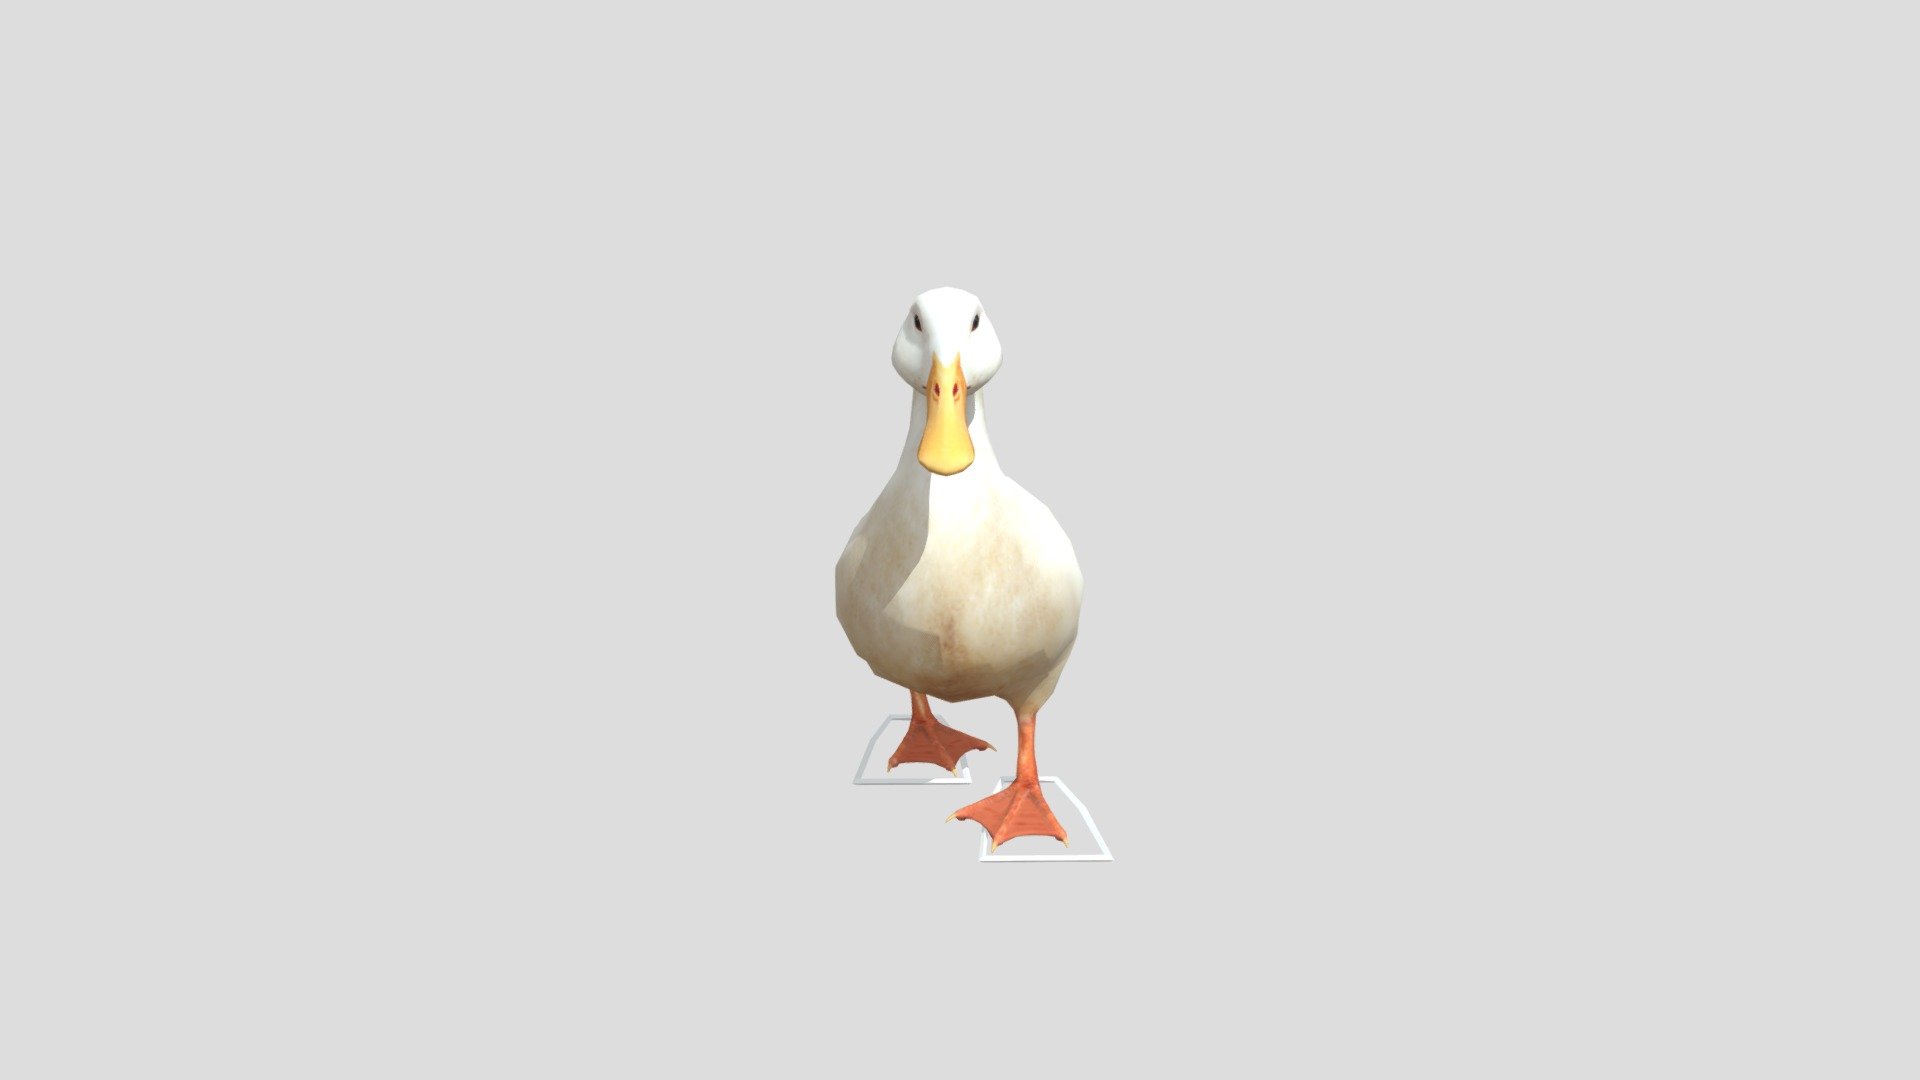 For More Info 
WhatsApp +923227666868

Rigged Animated Duck 3D model.

Include scene demo
14 Animations in root motion
2 Textures (4096x4096)

Low poly model

2668 quad polygons on this mesh
2670 vertices on this mesh

Textures
Duck_D
Duck_N

Animations List

eat(203-263)

idle(27-200)

idletolay(266-275)

lay(332-505)

laytoidle(305-314)

run(317-329&gt;

runleft(508-520)

runright(523-535)

swim(278-302)

turnleft(592-616)

turnright(619-643)

walk(0-24)

walkleft(538-562)

walkright(565-589) - Duck 3D model Animated Rigged - 3D model by Adeel Qadir (@adeelqadir2021) 3d model